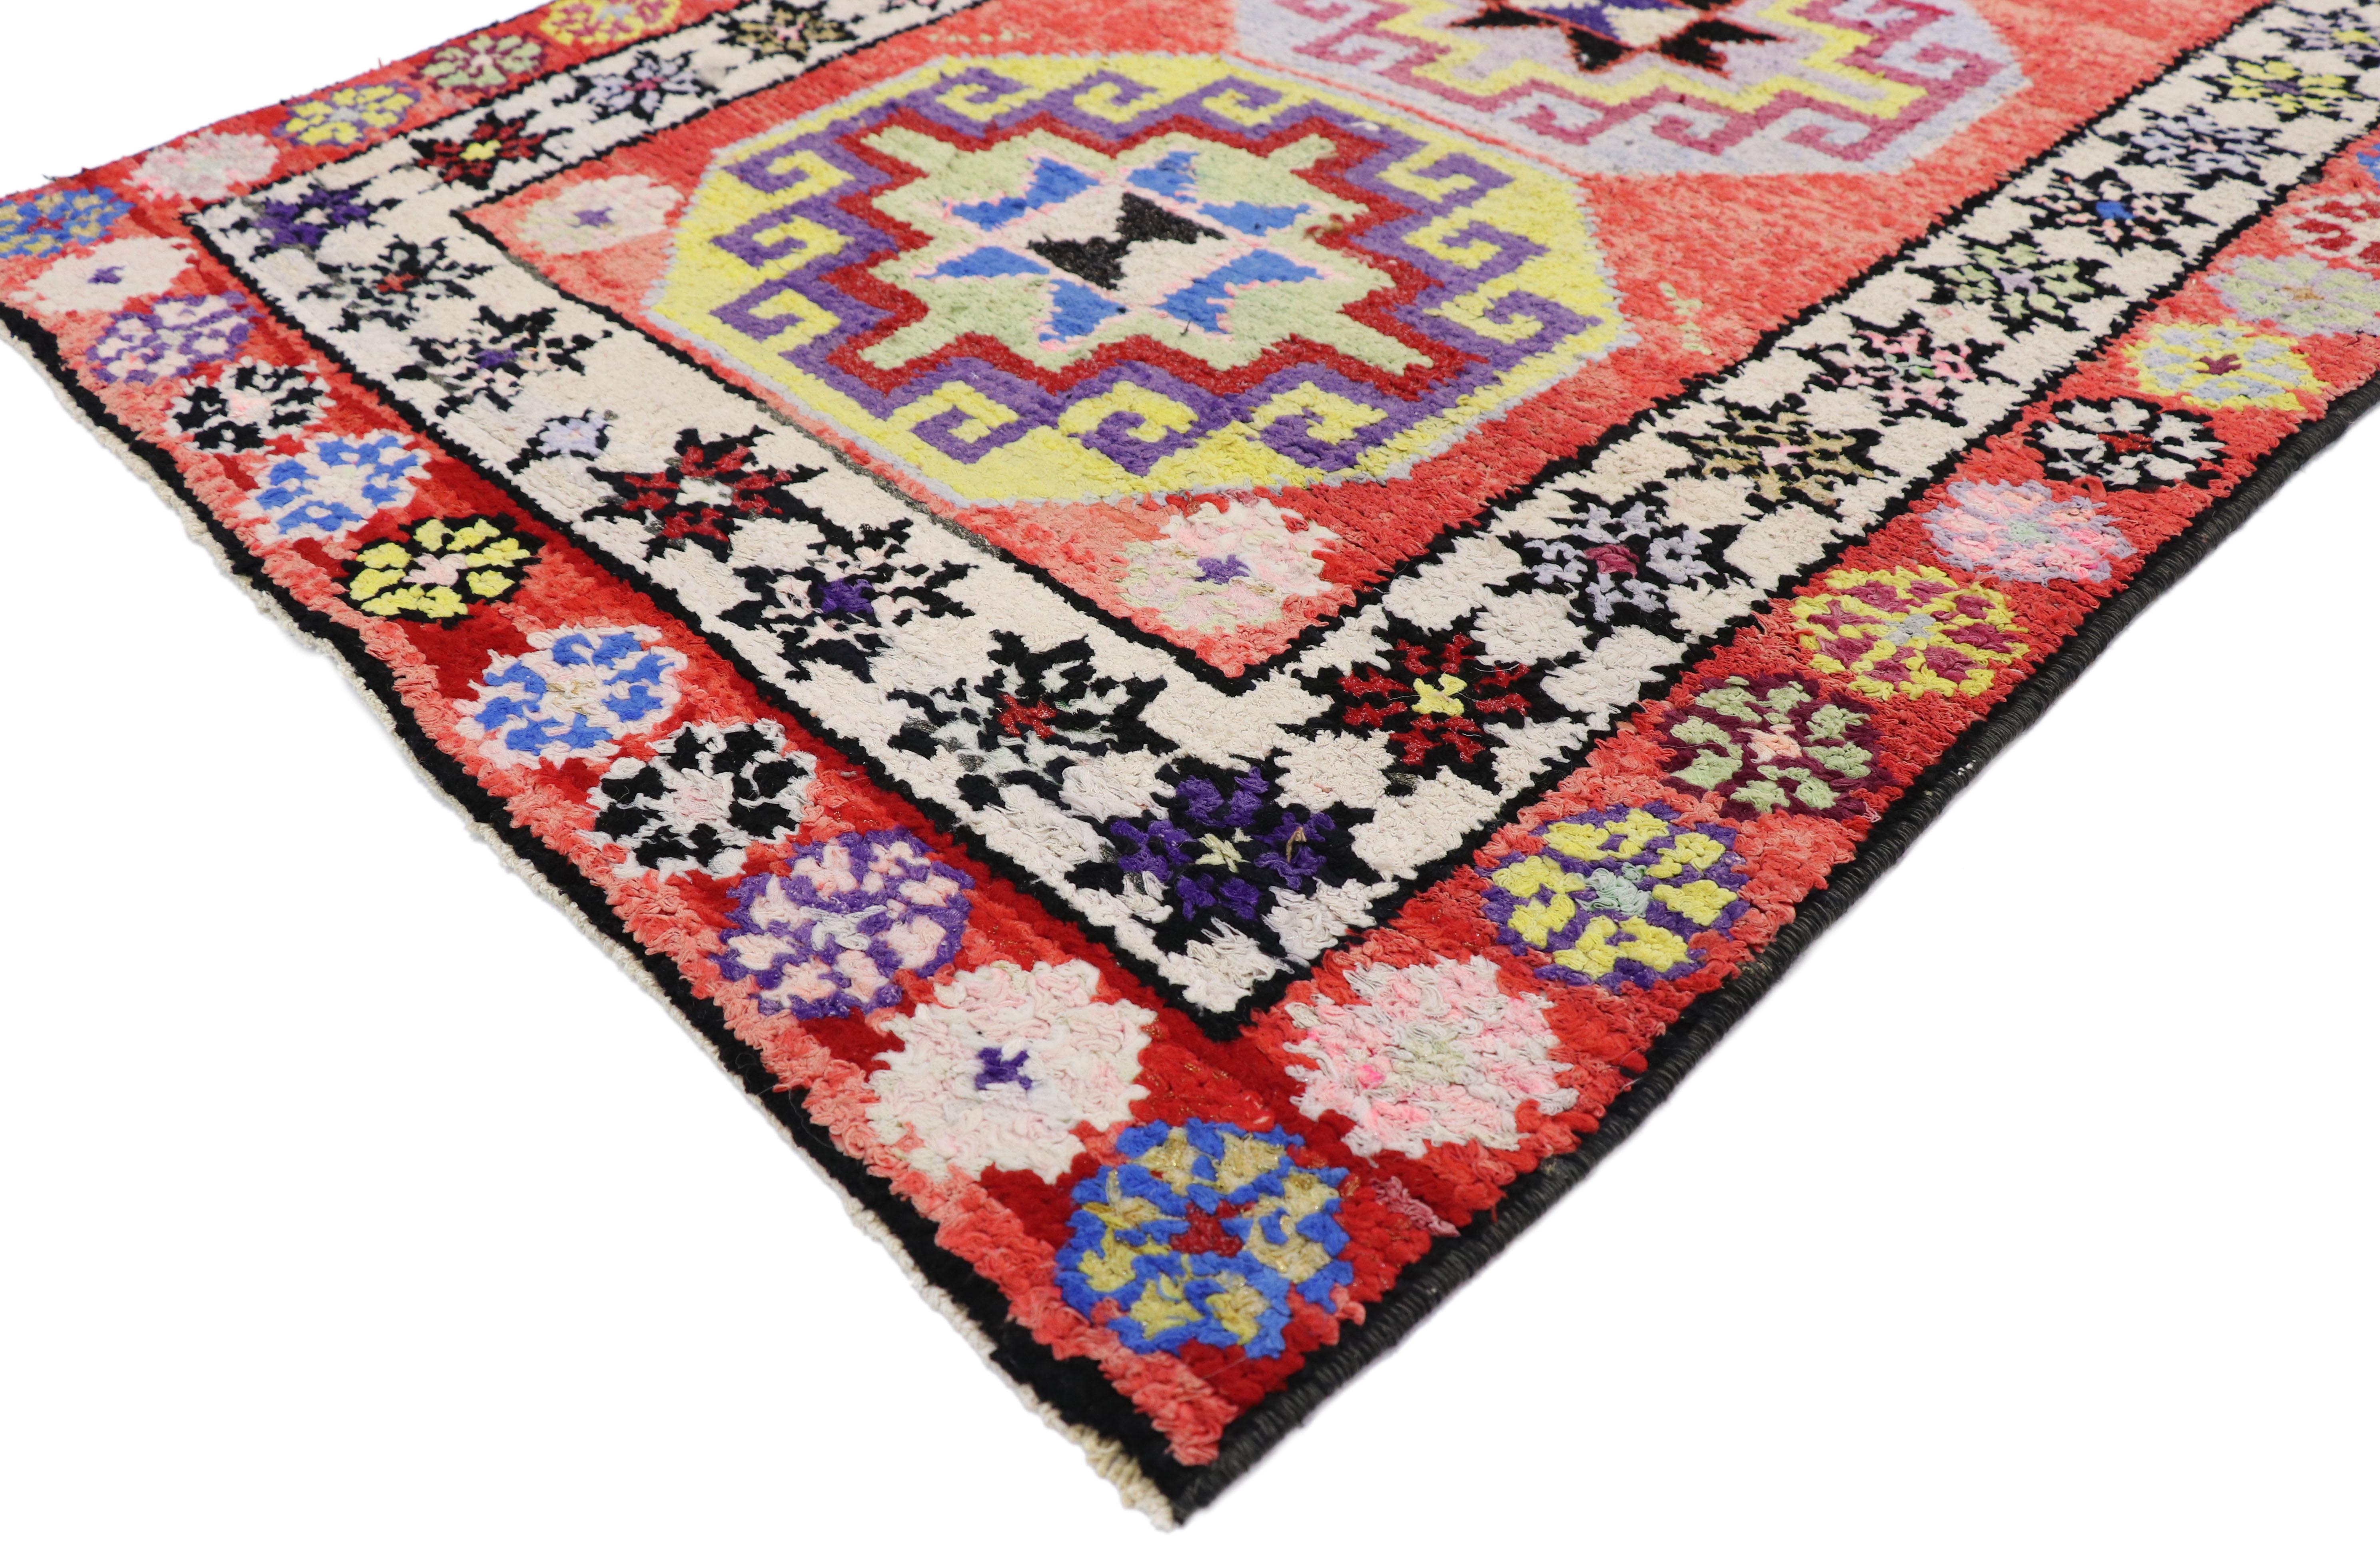 52639, vintage Turkish Oushak runner with contemporary Tribal and Modern Mexican style. With its vibrant colors and exotic pattern, this hand knotted wool vintage Turkish Oushak runner beautifully melds modern Mexican style with contemporary tribal